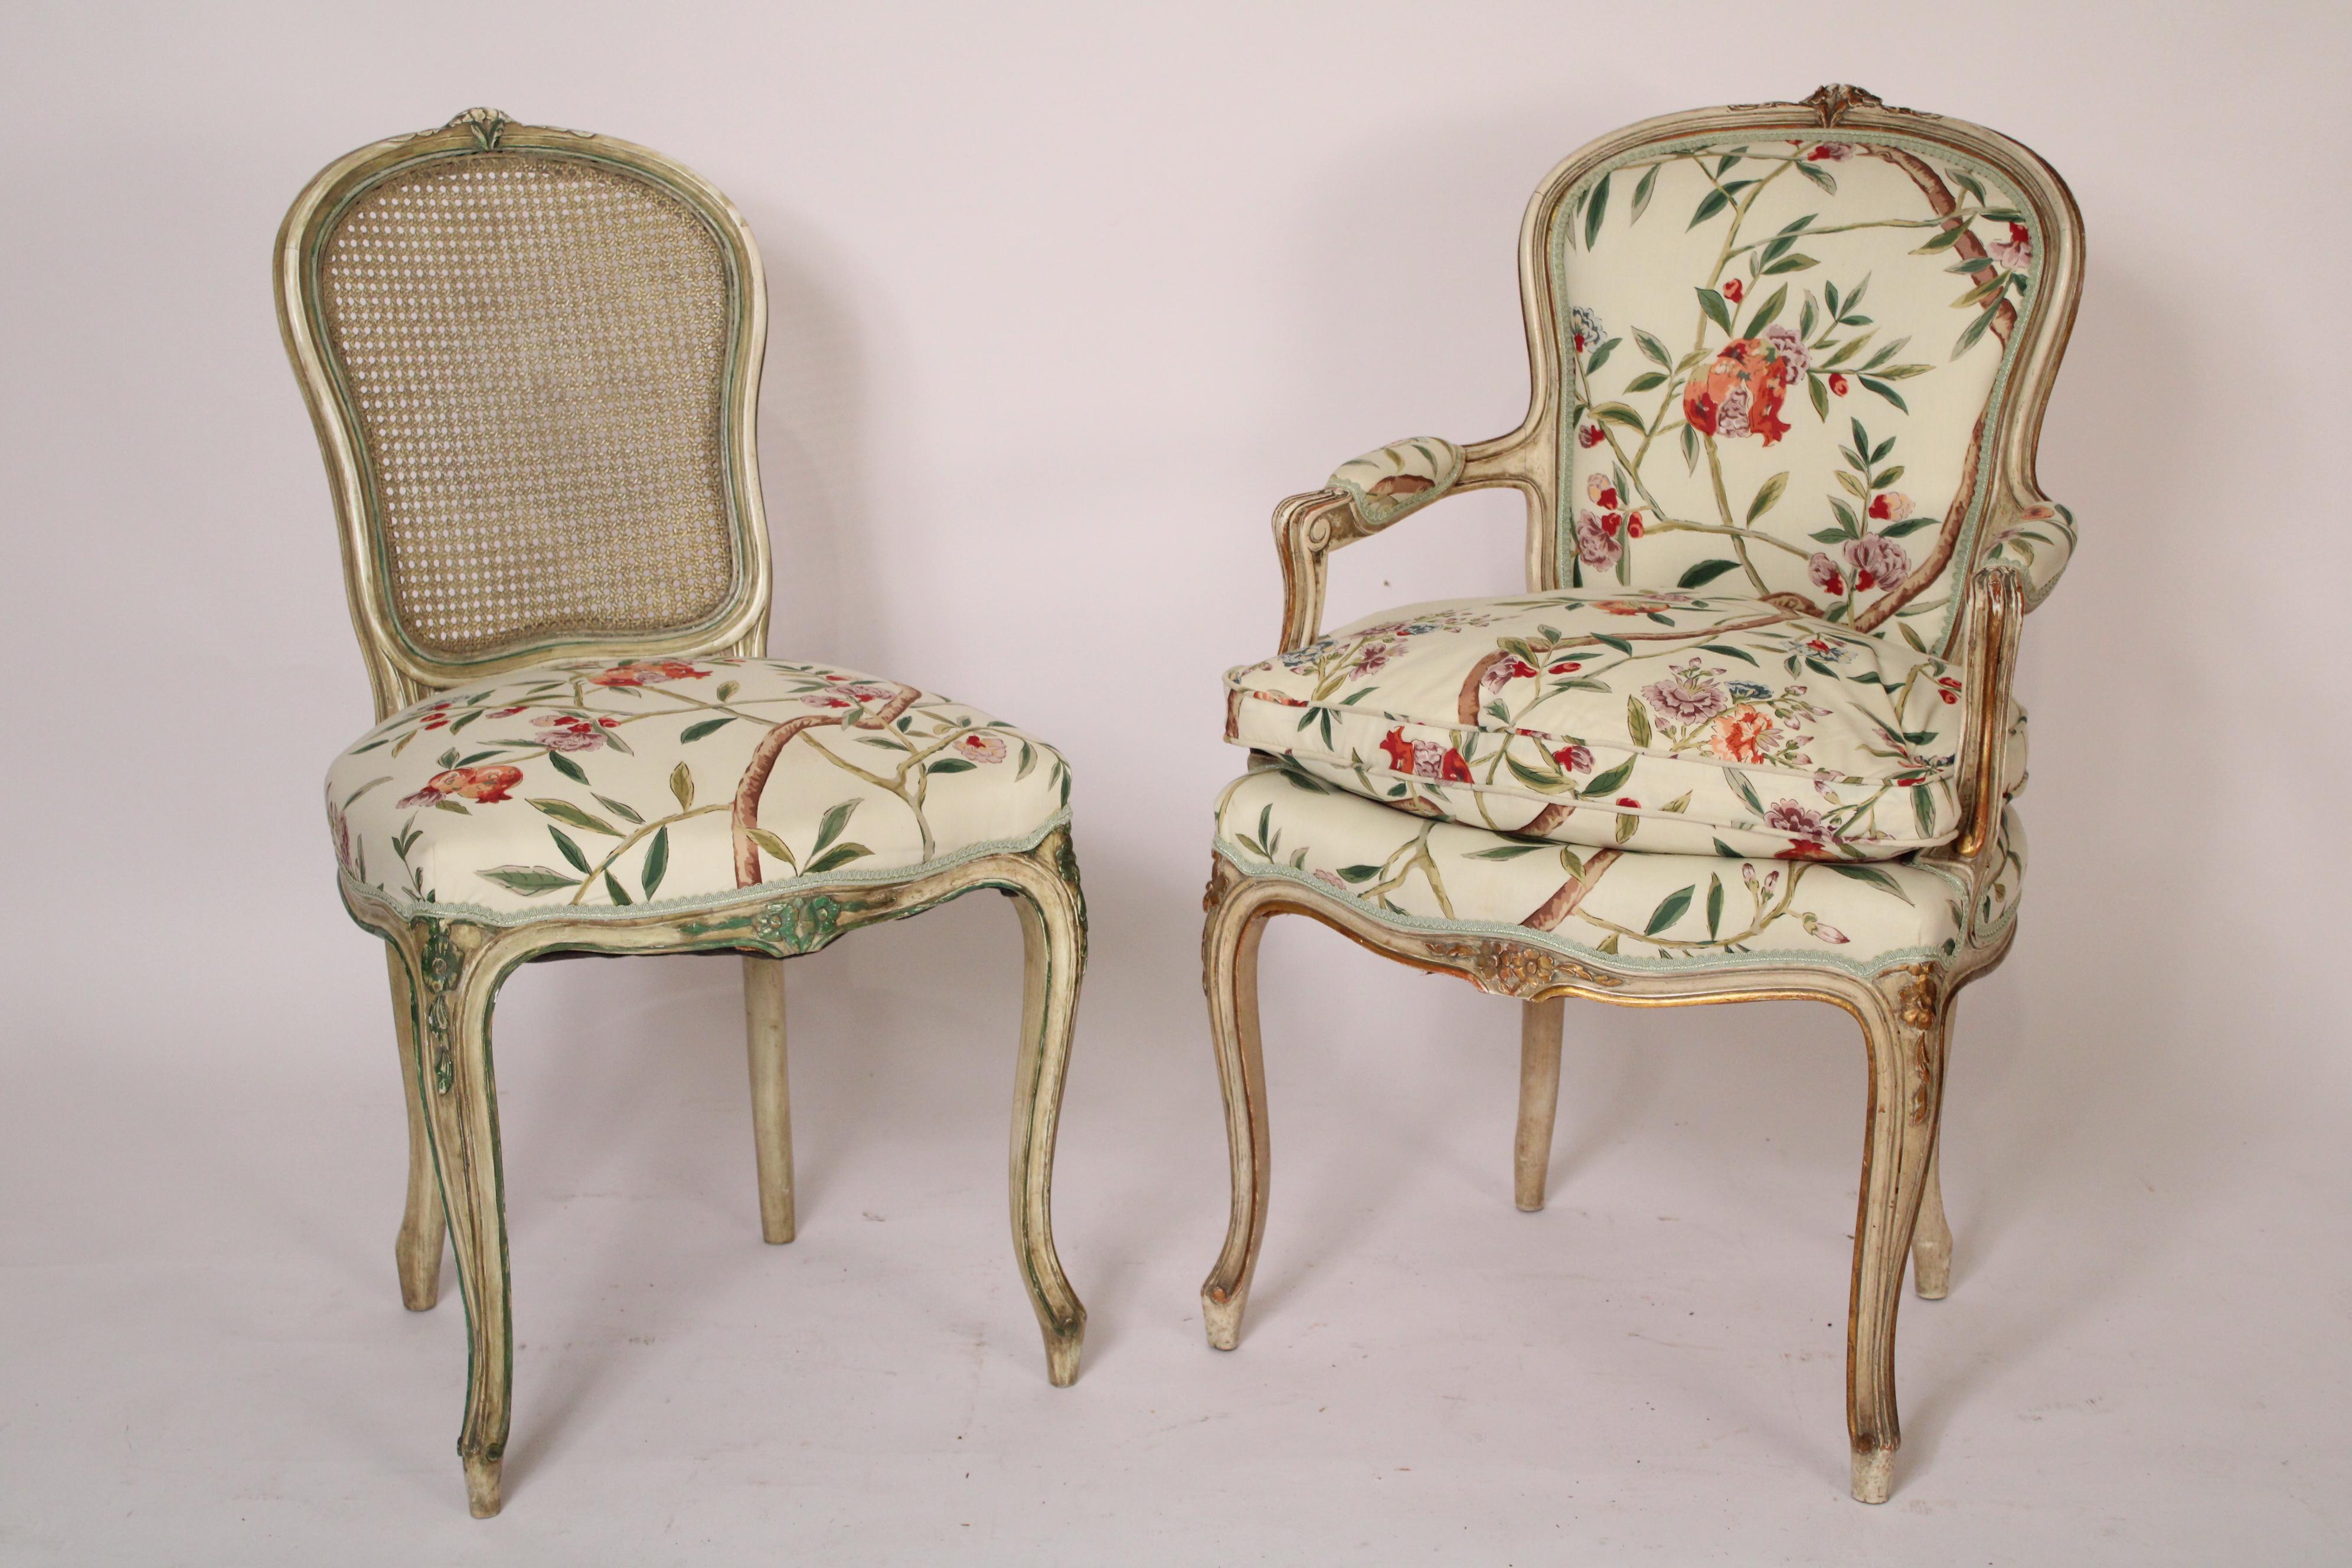 Set of 8 Louis XV style painted dining room chairs, circa 1960's. With rounded crest rails with central floral carving, cane backs, floral upholstered seats, armchairs with partial down filled seats, resting on cabriole legs. Dimensions of